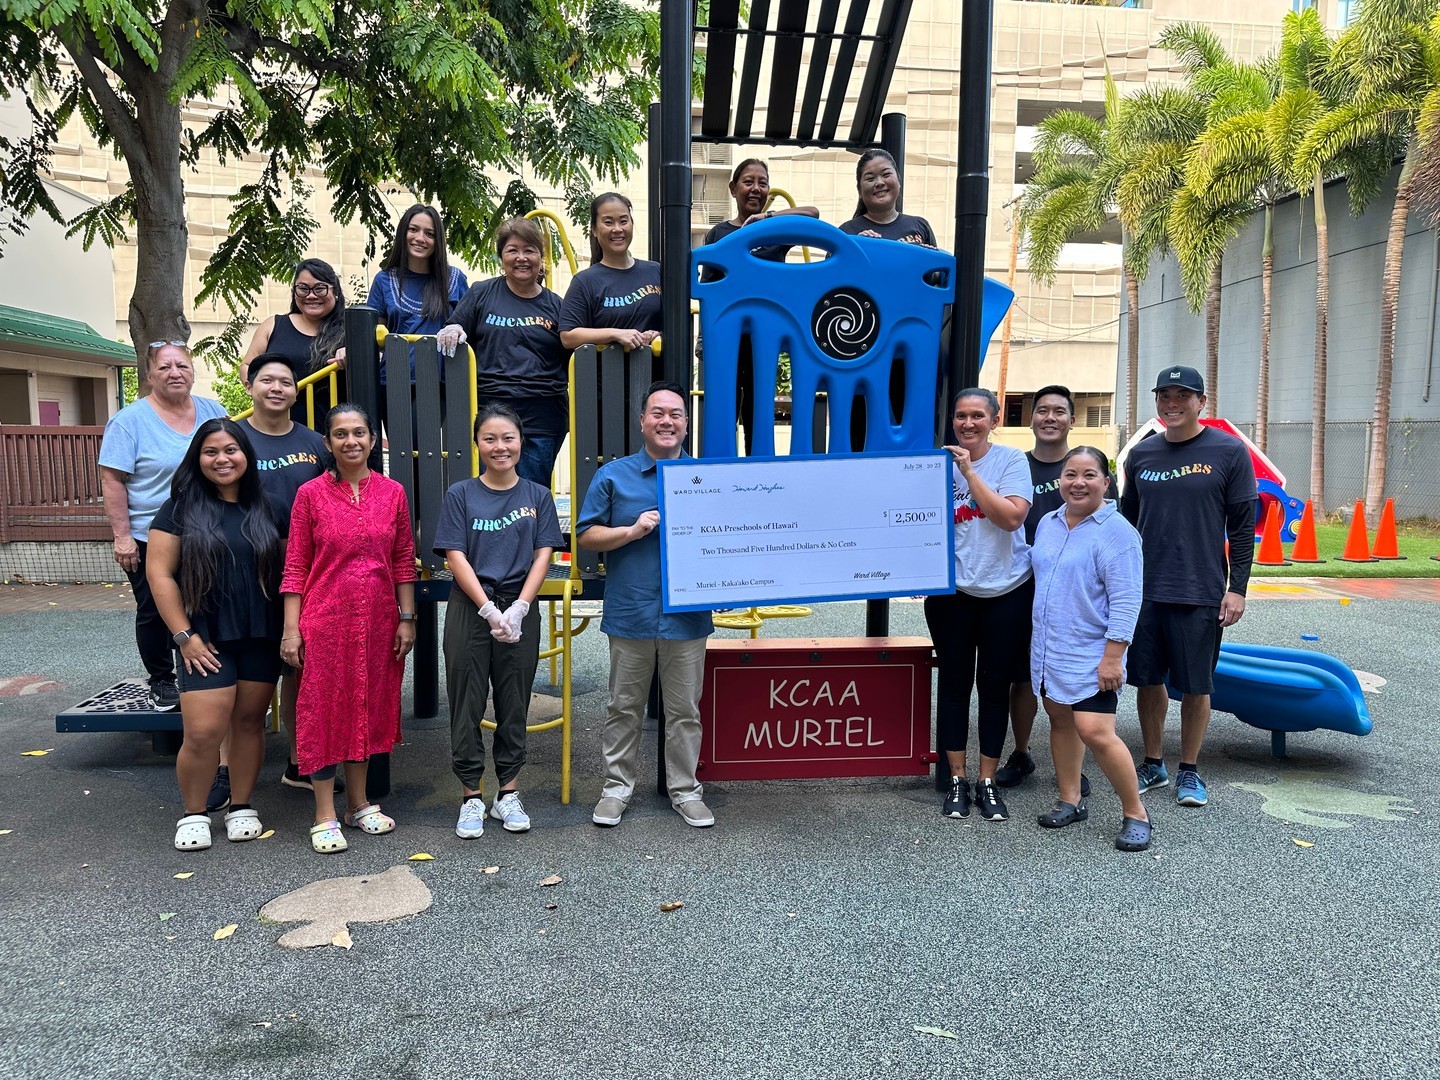 Ward Village is proud to support KCAA Preschools of Hawai‘i in its efforts to provide local keiki with early childhood education programs in Honolulu. Learn more about their mission and our community giving initiatives at the link in our bio.